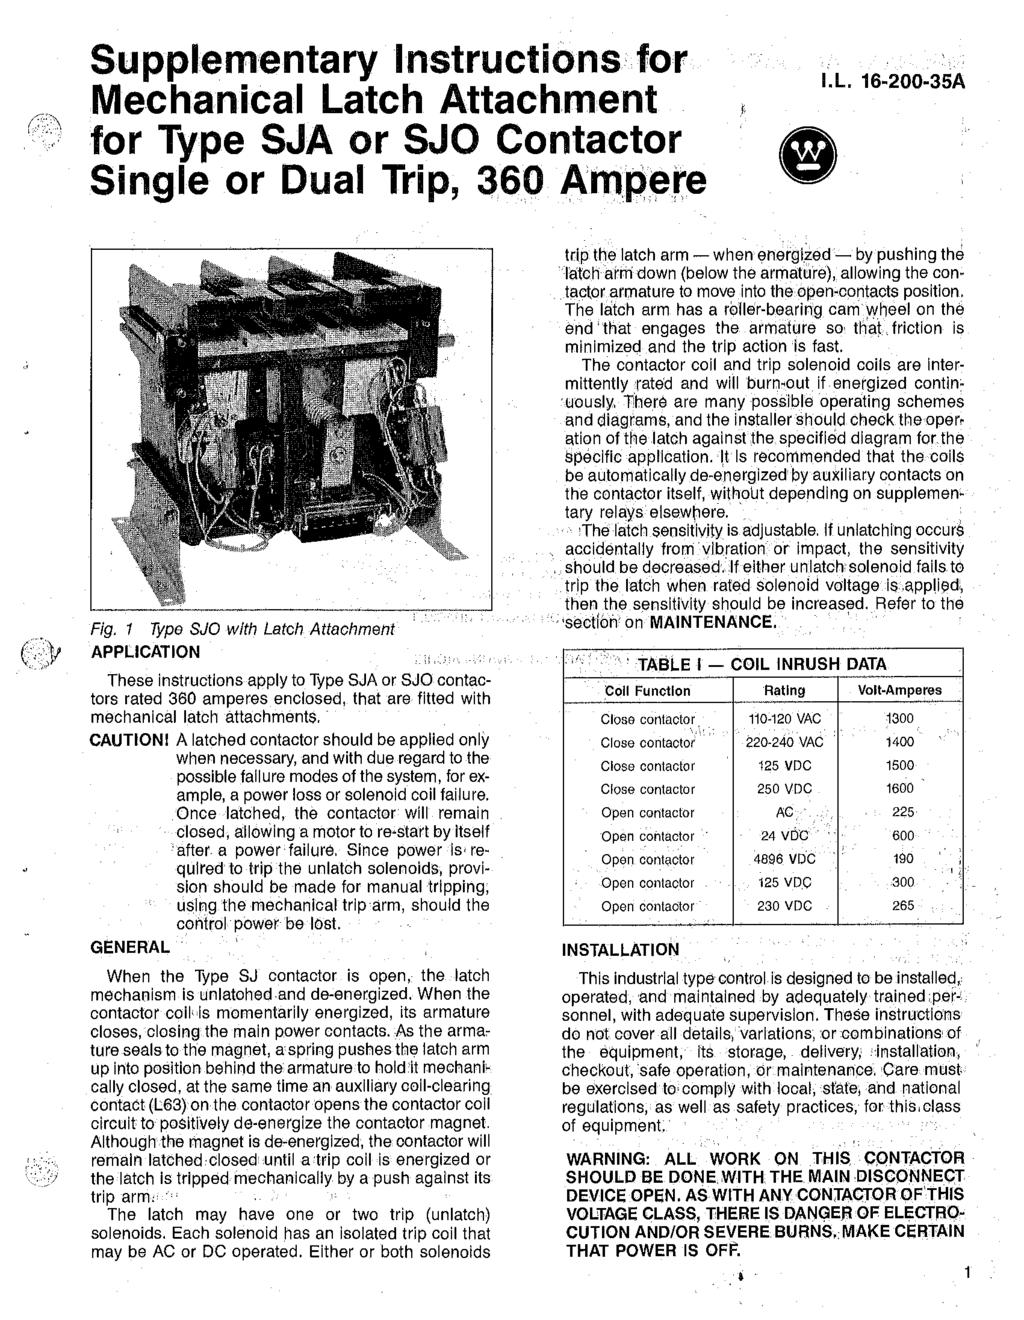 Supplementary nstructions for Mechanical Latch Attachment for Type SJA or SJO Contactor Single or Dual Trip, 36 Ampre. L. 16 2-35A Fig.